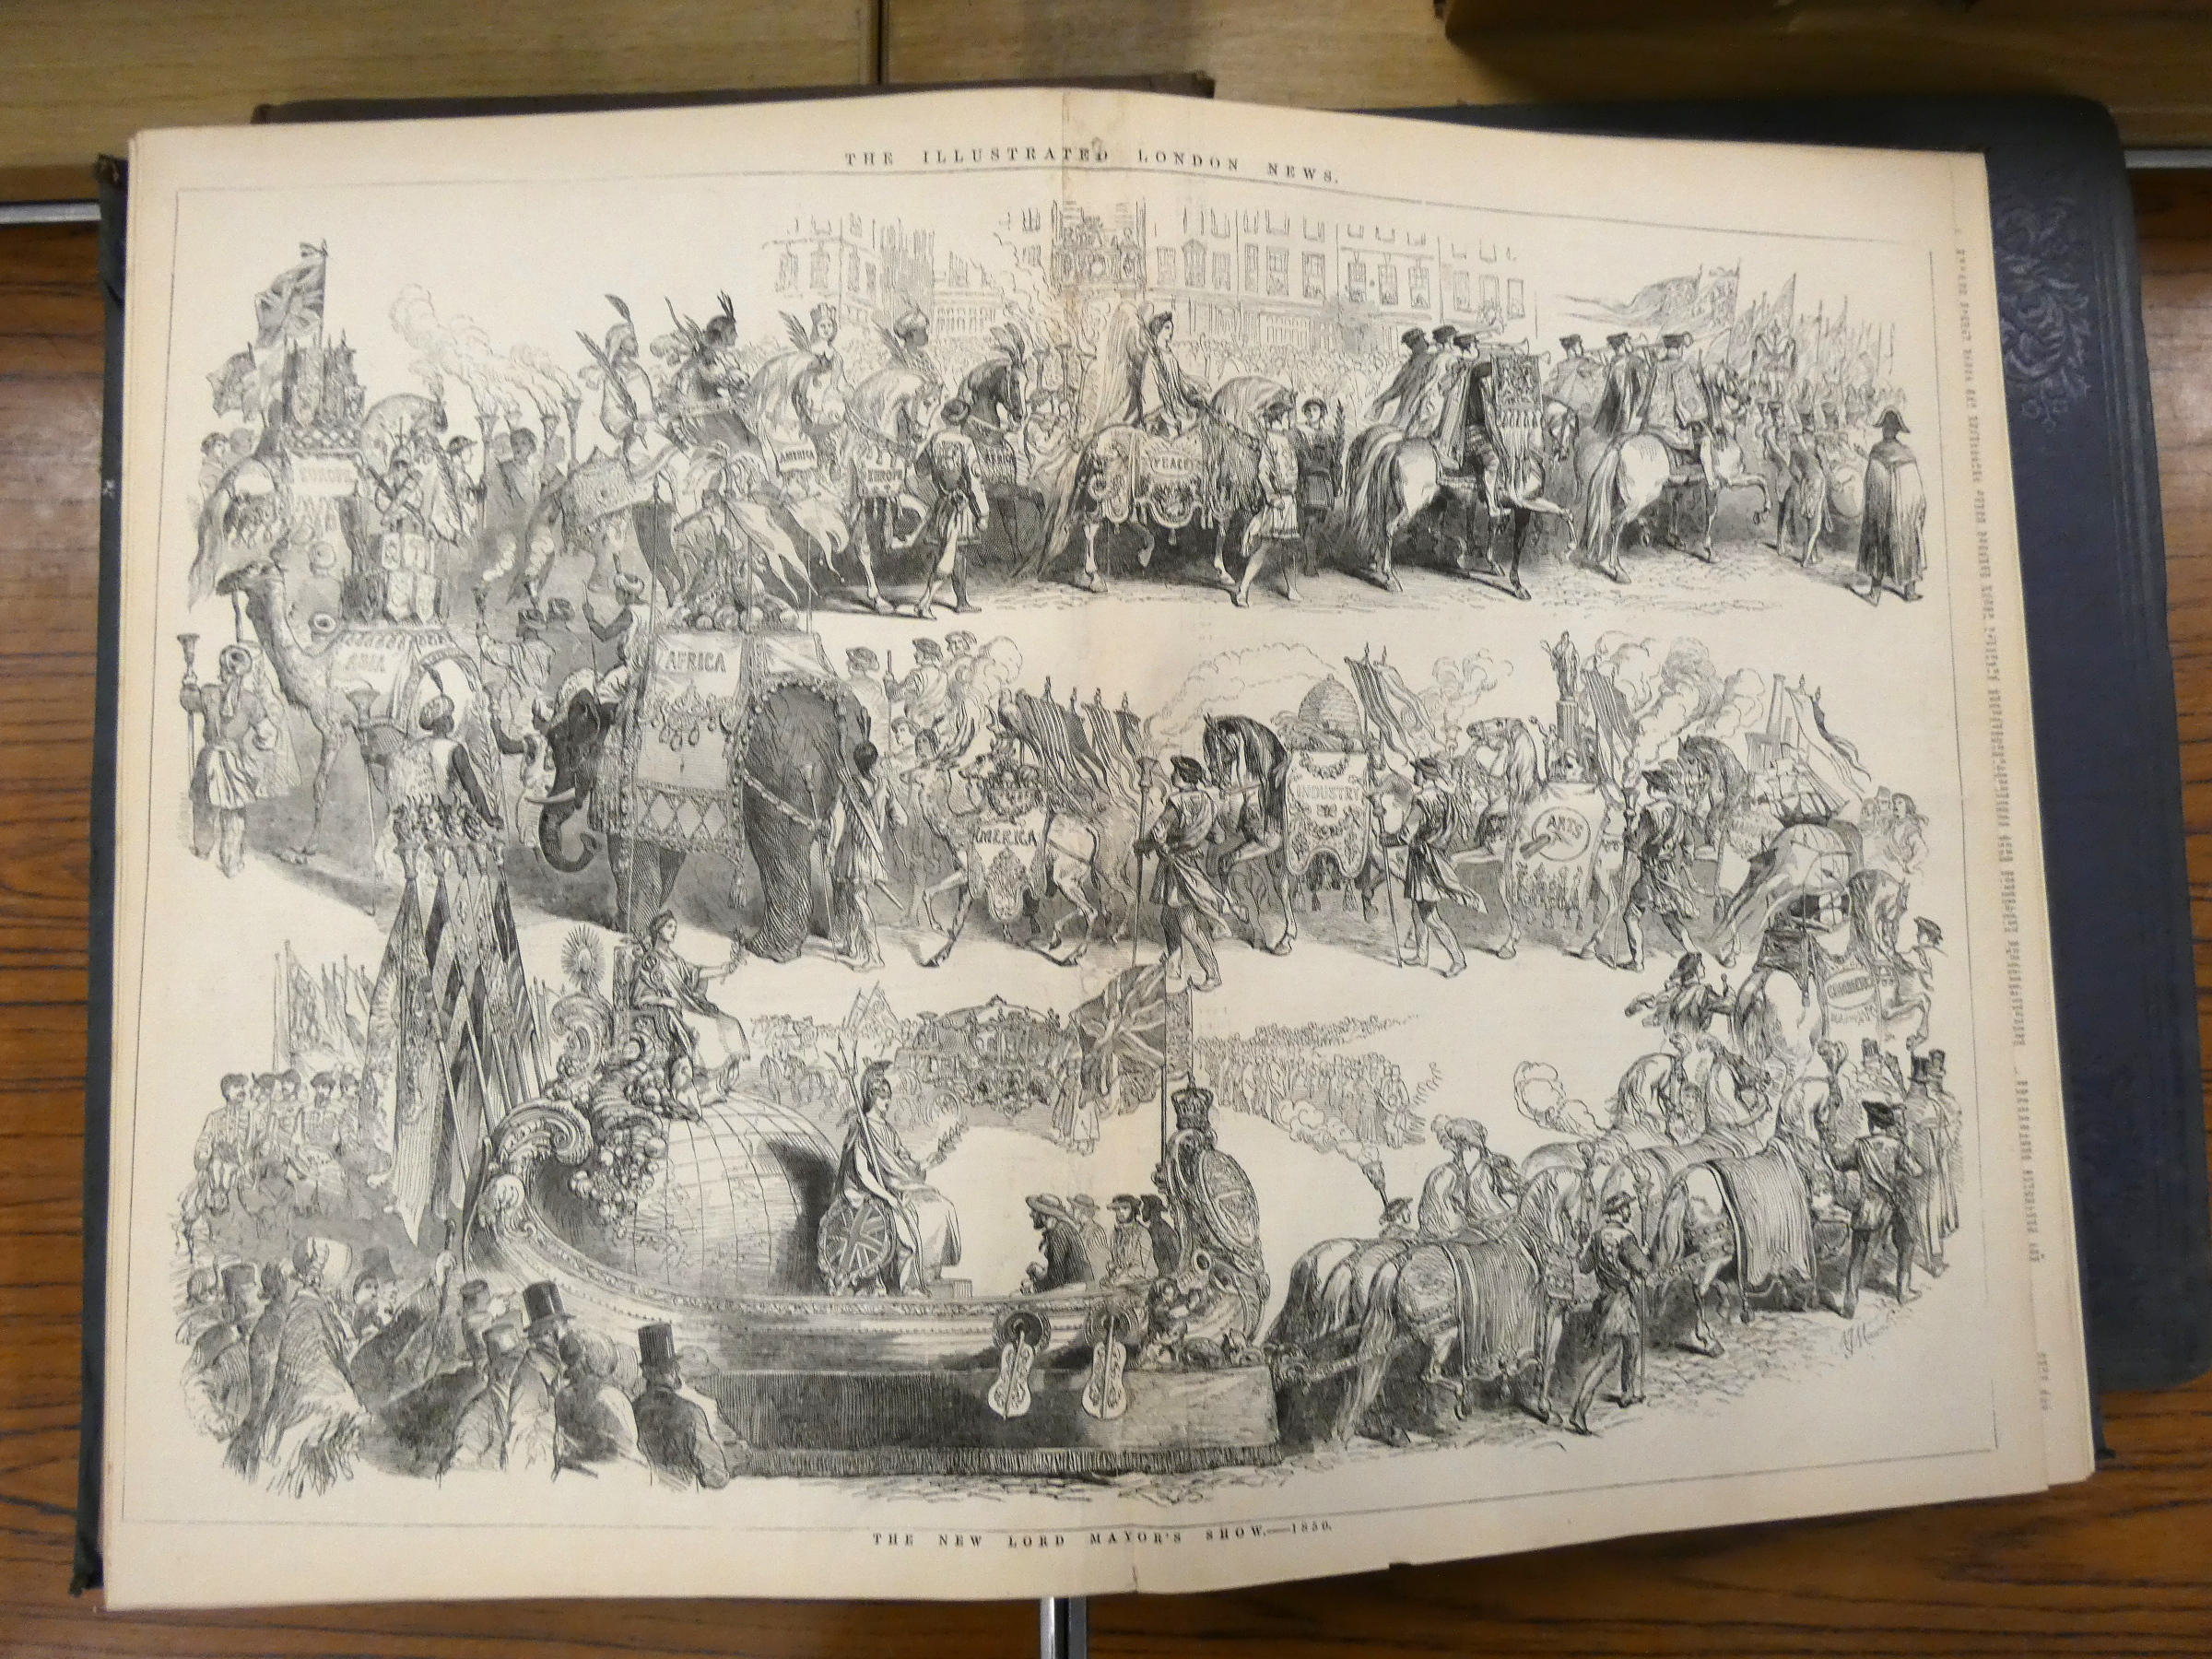 THE ILLUSTRATED LONDON NEWS.  4 bound vols. nos. 15, 17, 21 & 26. Very many plates, illus. & - Image 6 of 6